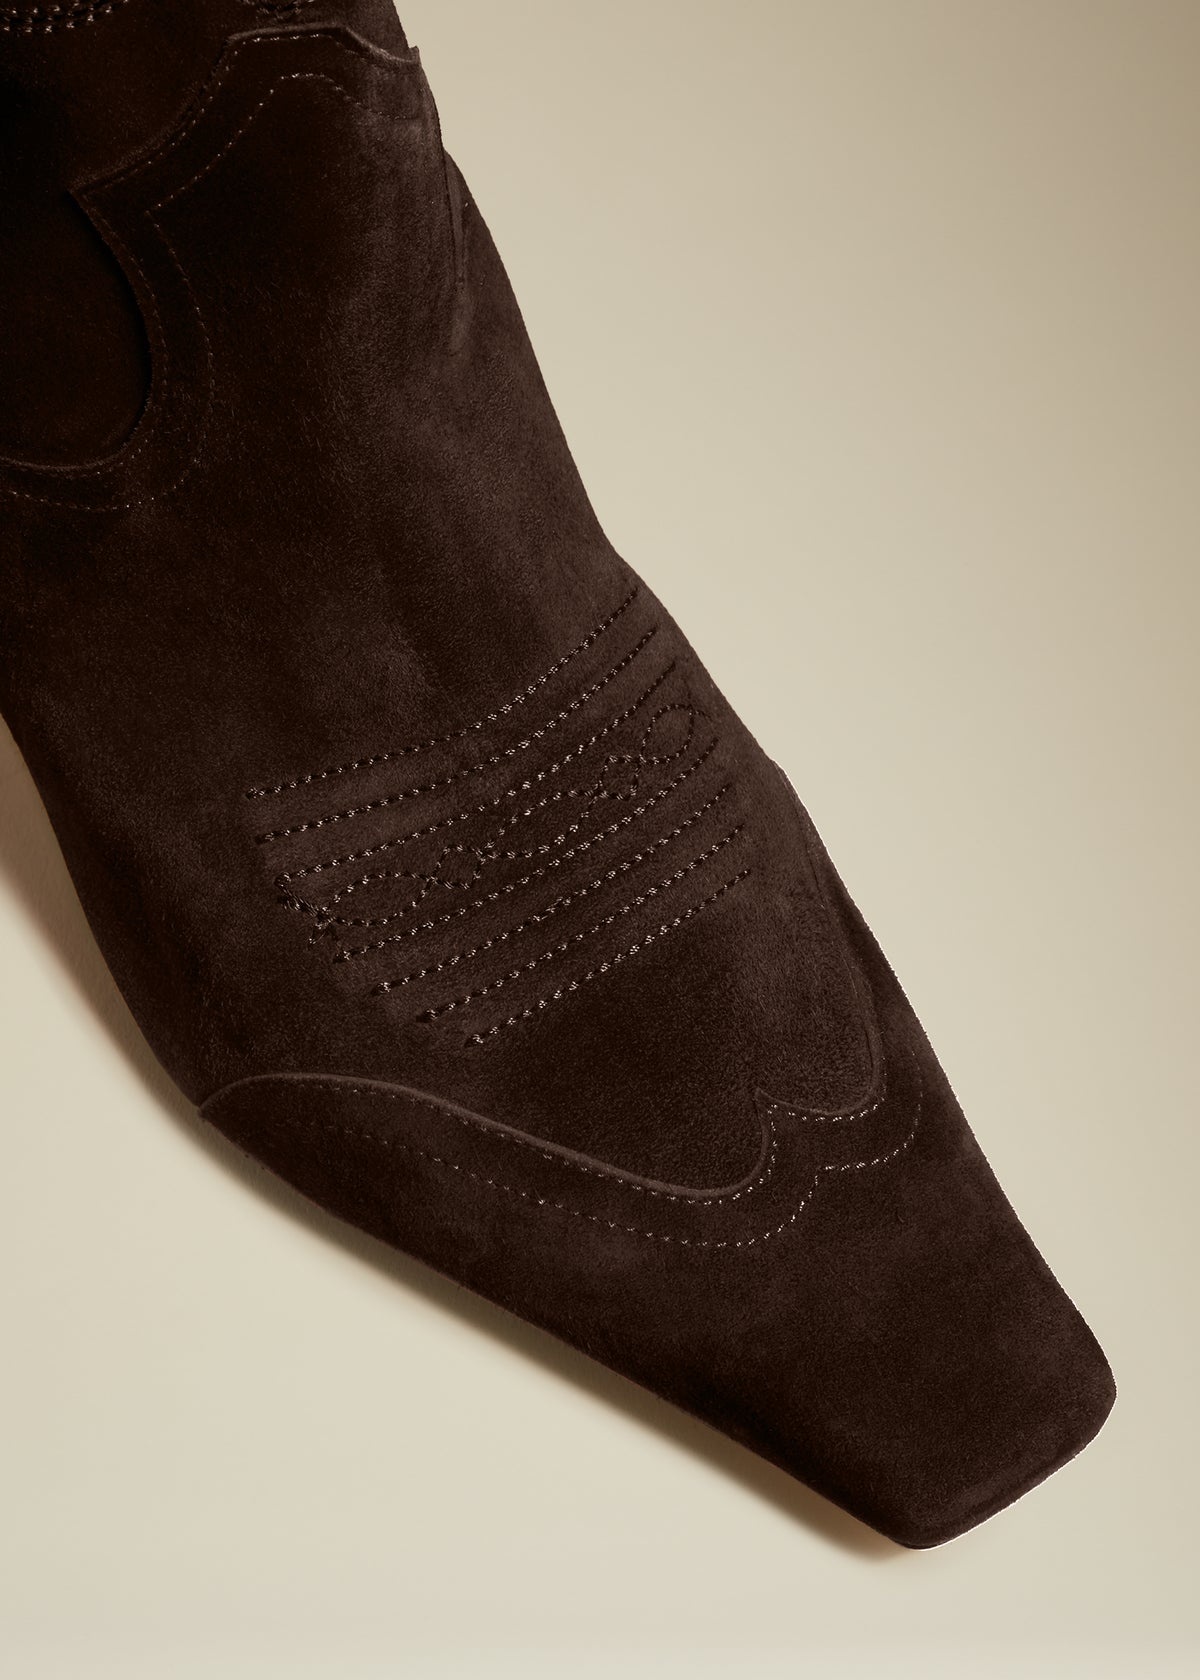 The Dallas Ankle Boot in Coffee Suede - 4